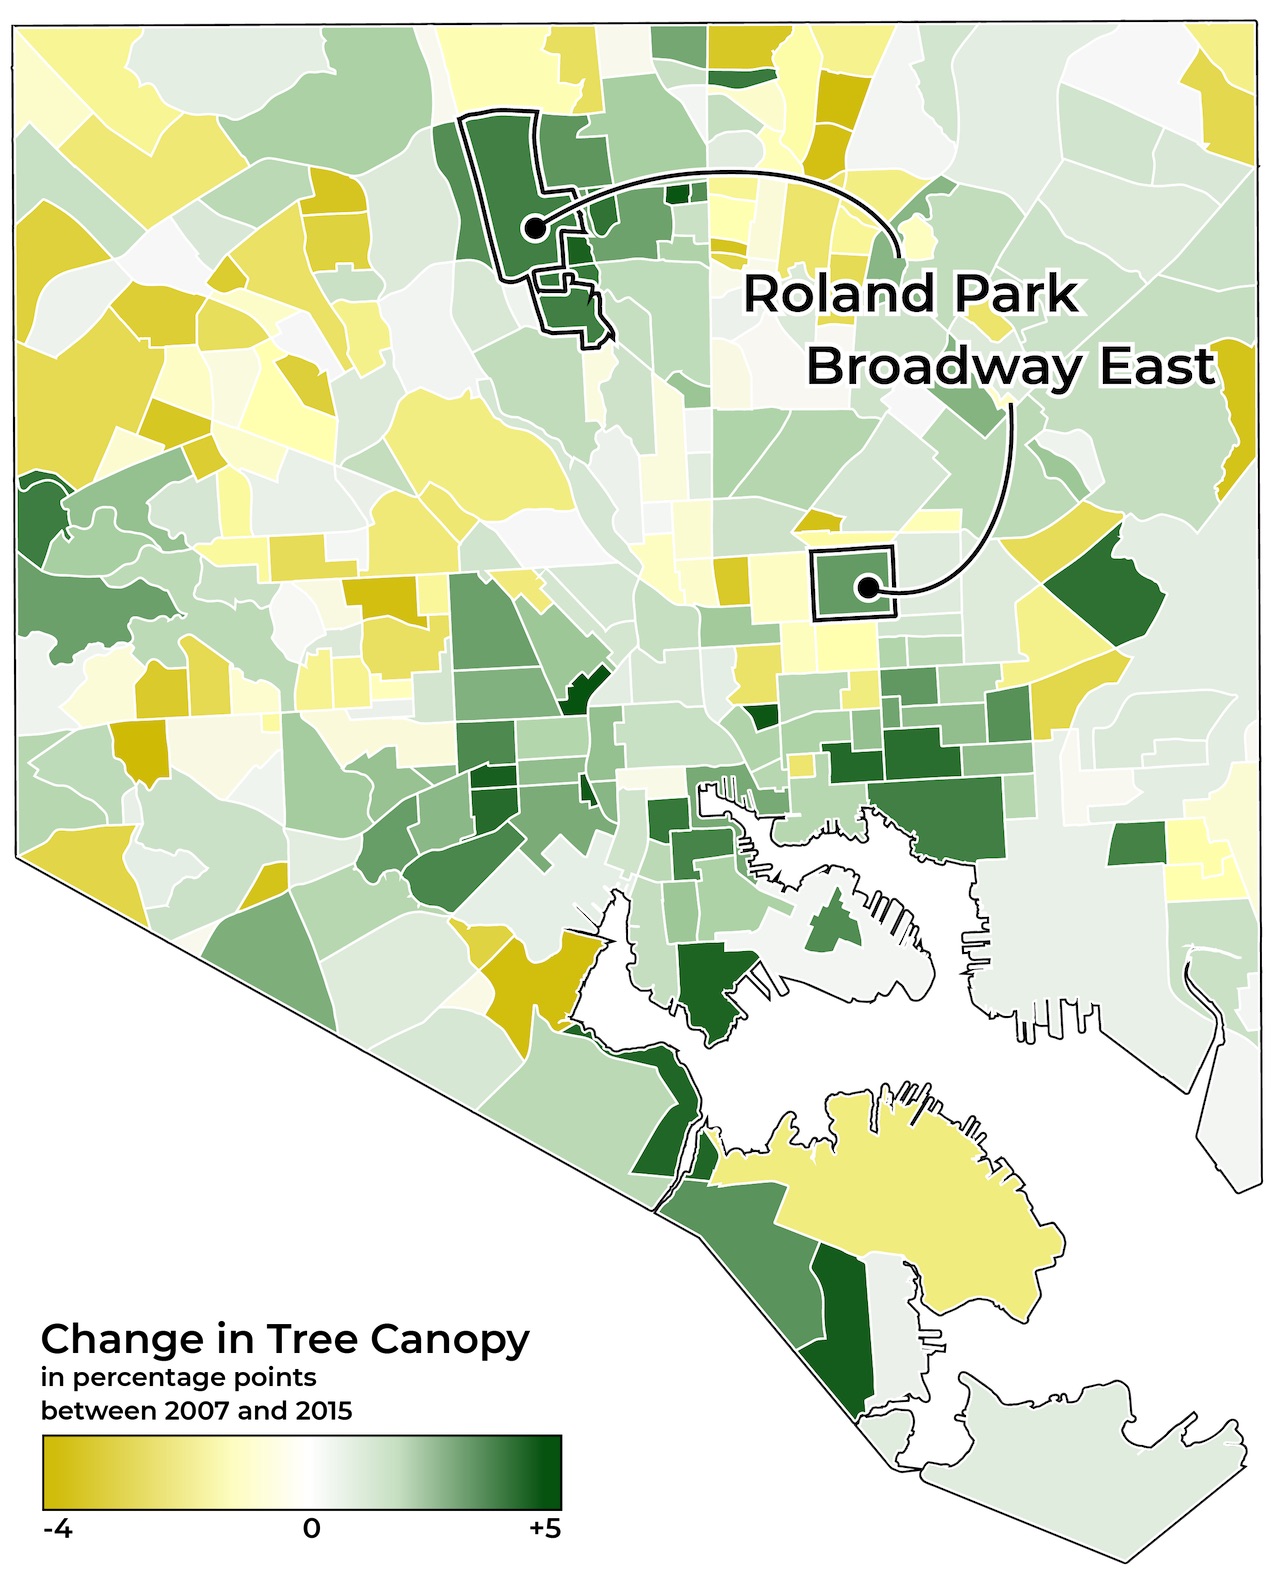 A map showing each neighborhood color-coded according to gains and losses in tree canopy between 2007 and 2015. Both Roland Park and Broadway East show increases.